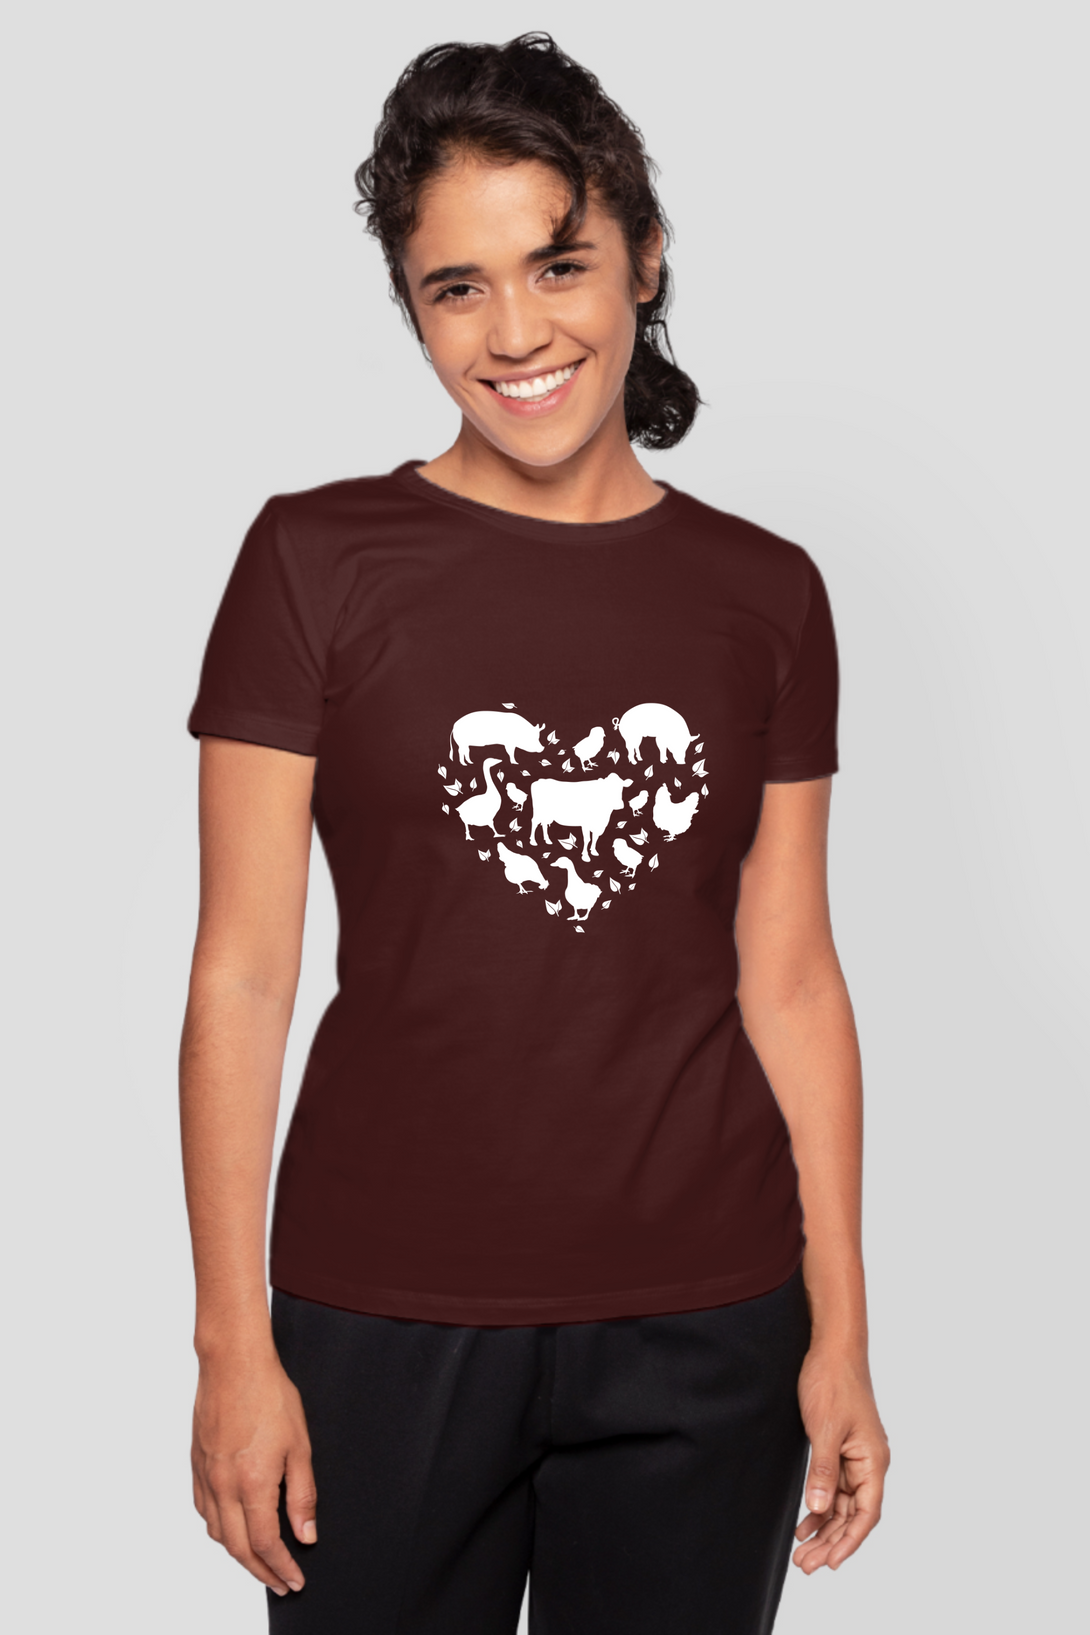 Farm Animals In My Heart Printed T-Shirt For Women - WowWaves - 7